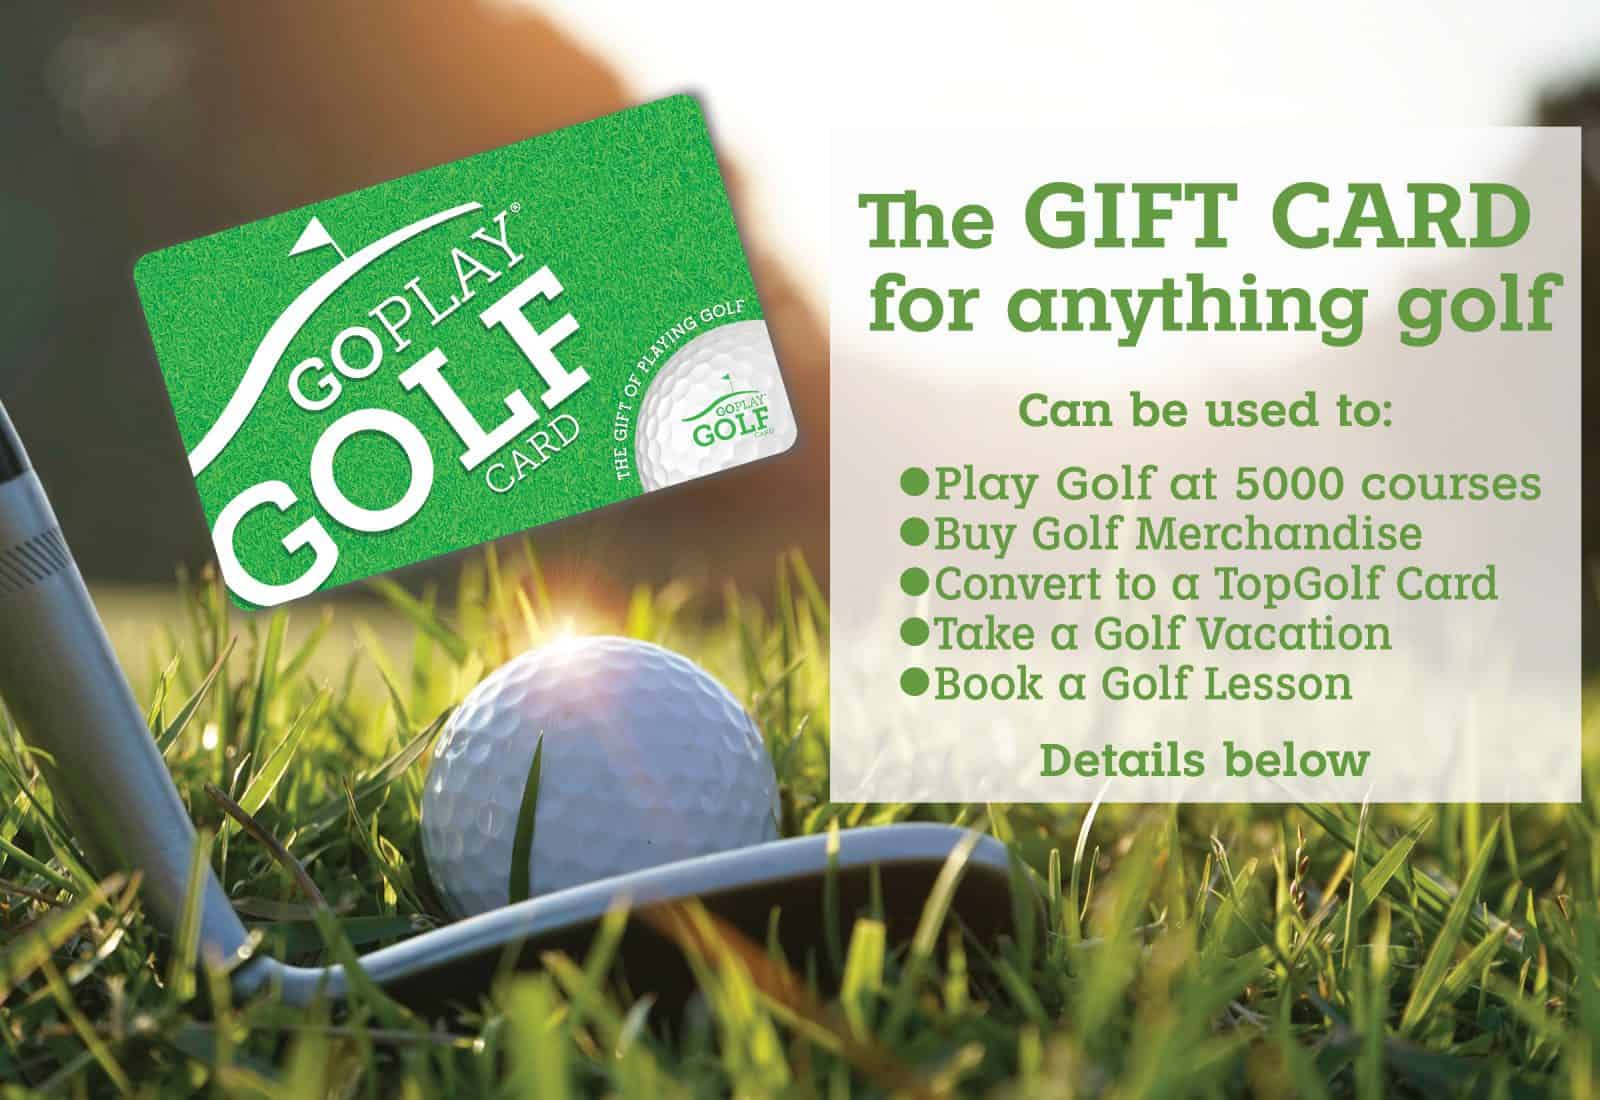 Go Play Golf Golf Gift Ideas and Golf Gift Card for Playing Golf!